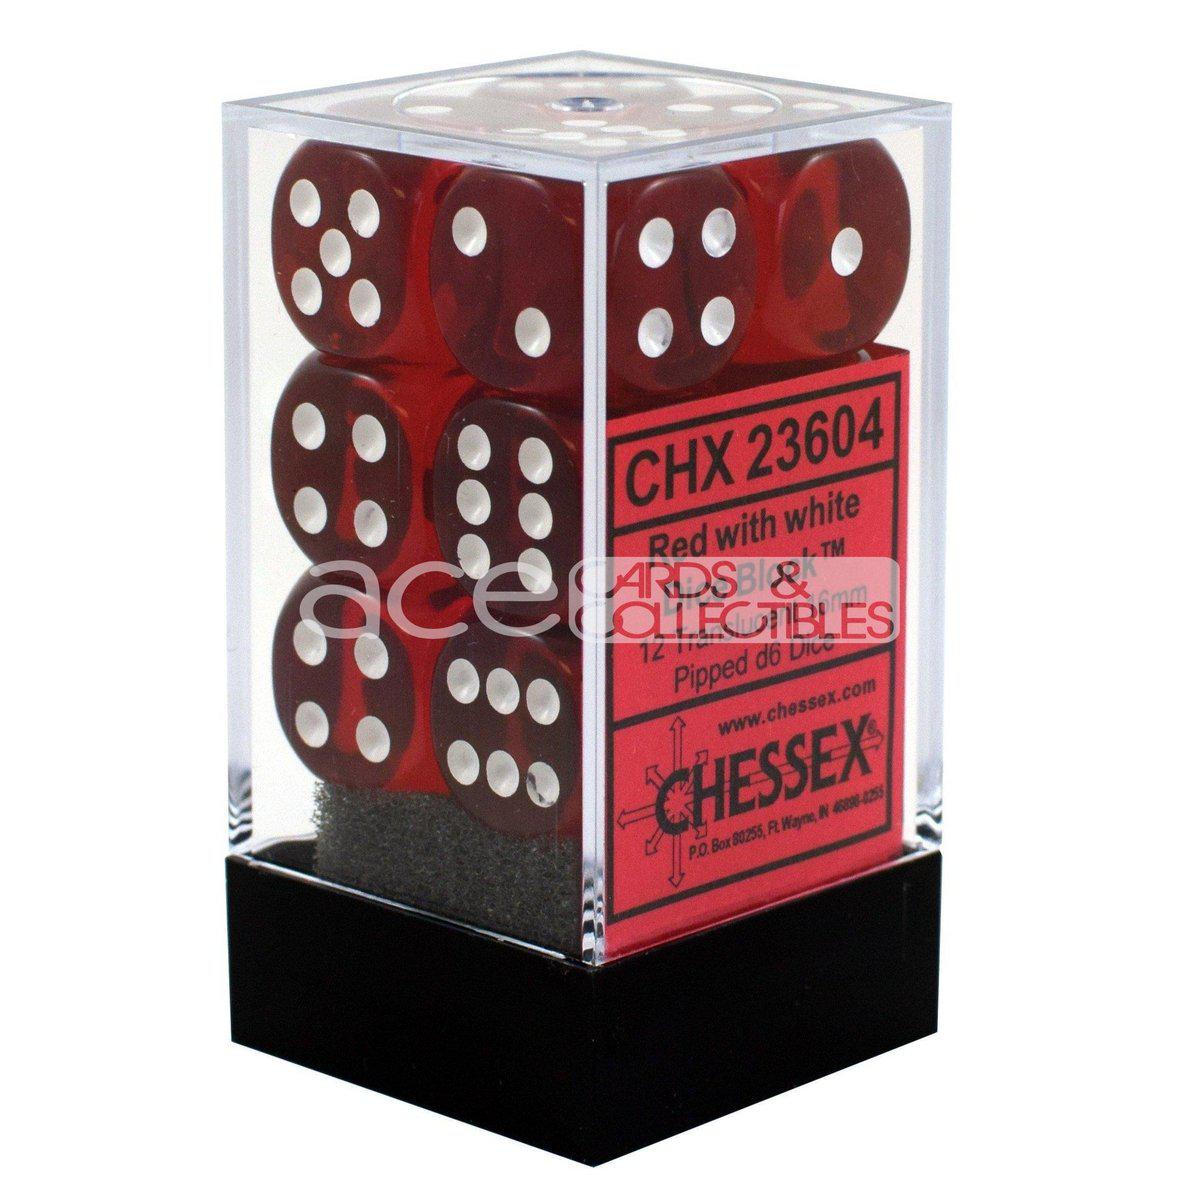 Chessex Translucent 16mm d6 12pcs Dice (Red/White) [CHX23604]-Chessex-Ace Cards &amp; Collectibles